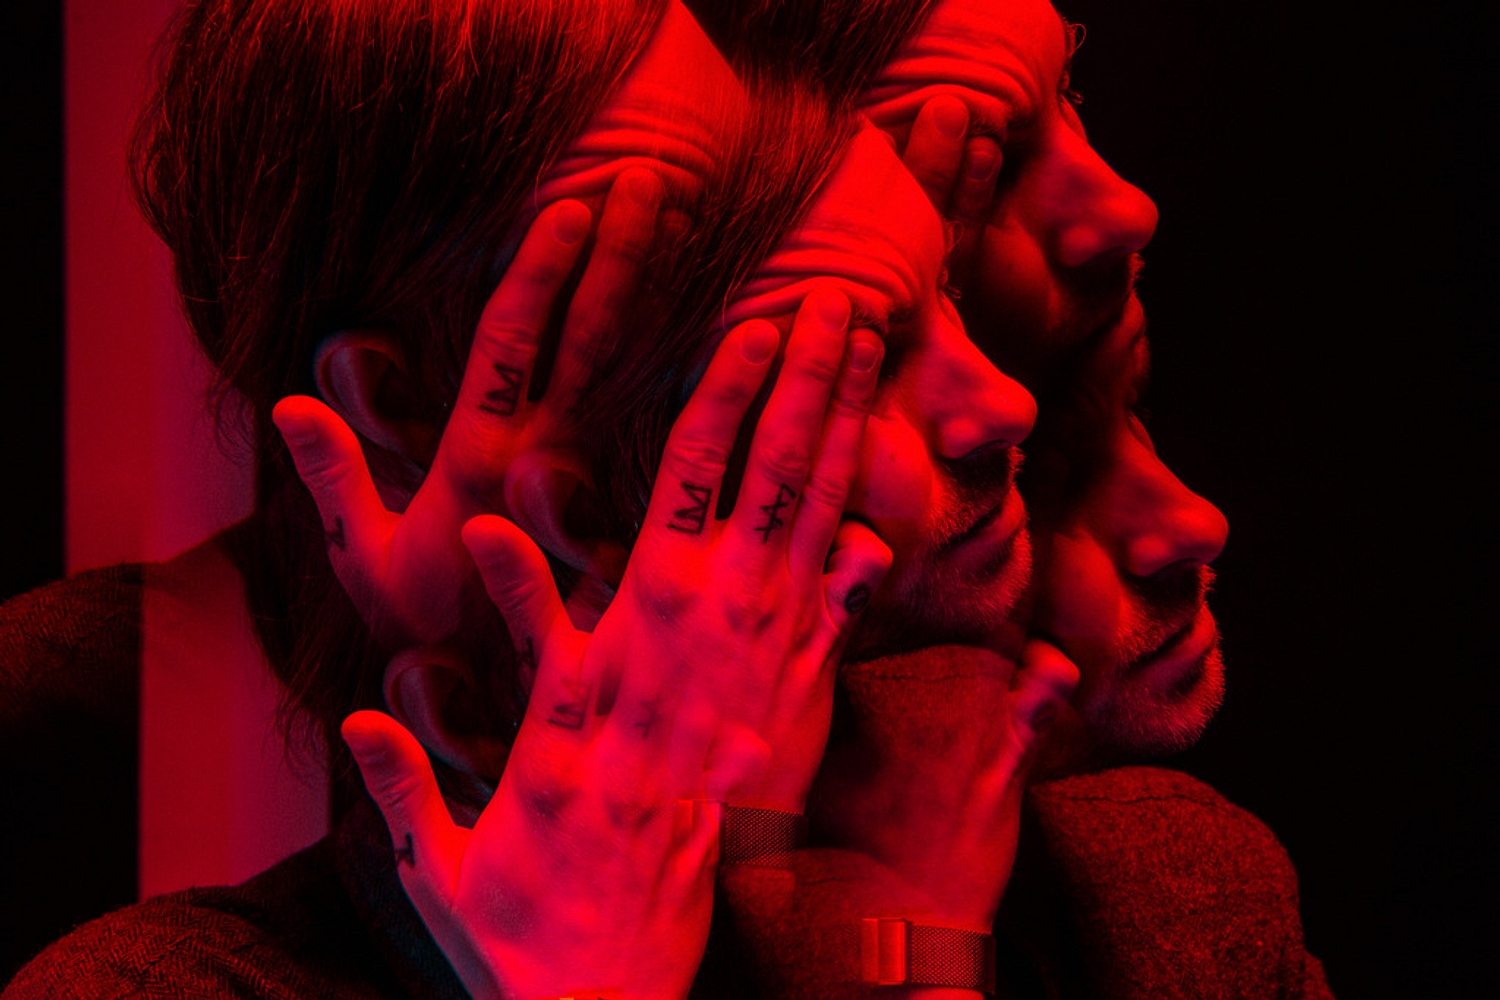 Blanck Mass releases new ‘The Great Confuso’ EP, streams part one of the title-track